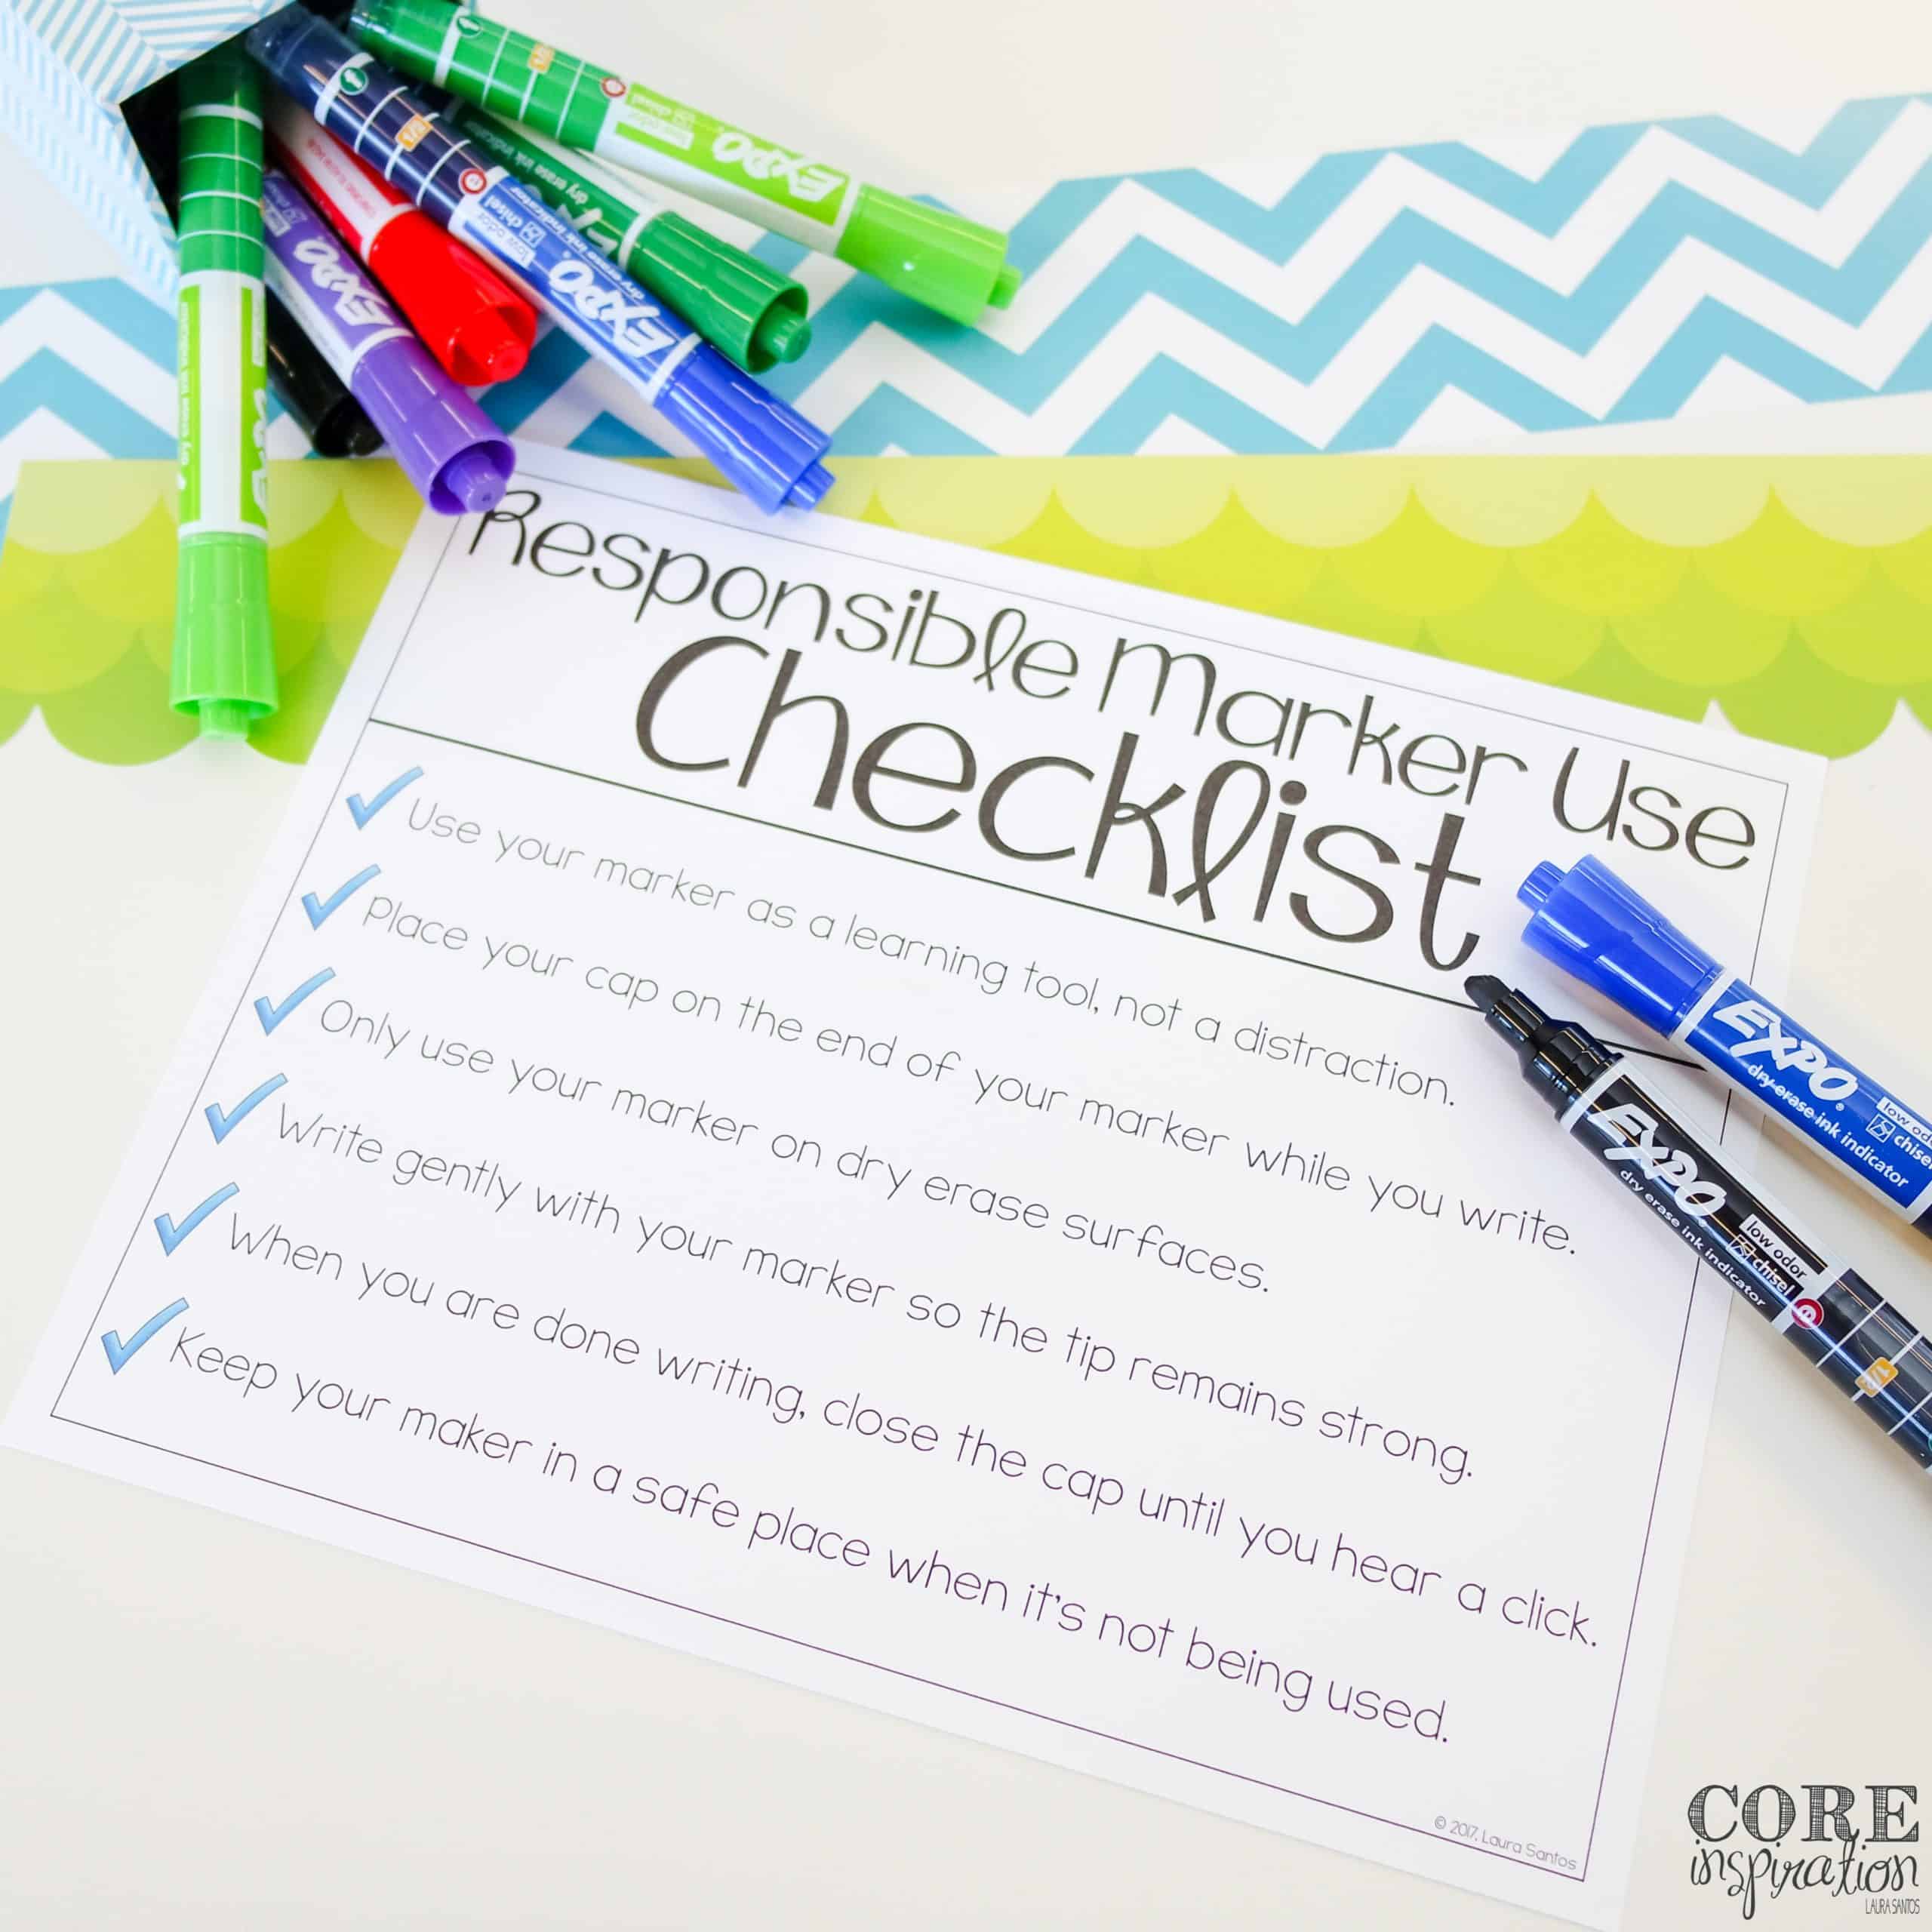 https://www.thecoreinspiration.com/wp-content/uploads/2017/07/Interactive-Back-To-School-Activities-with-Expo-Ink-Indicator-9-scaled.jpg